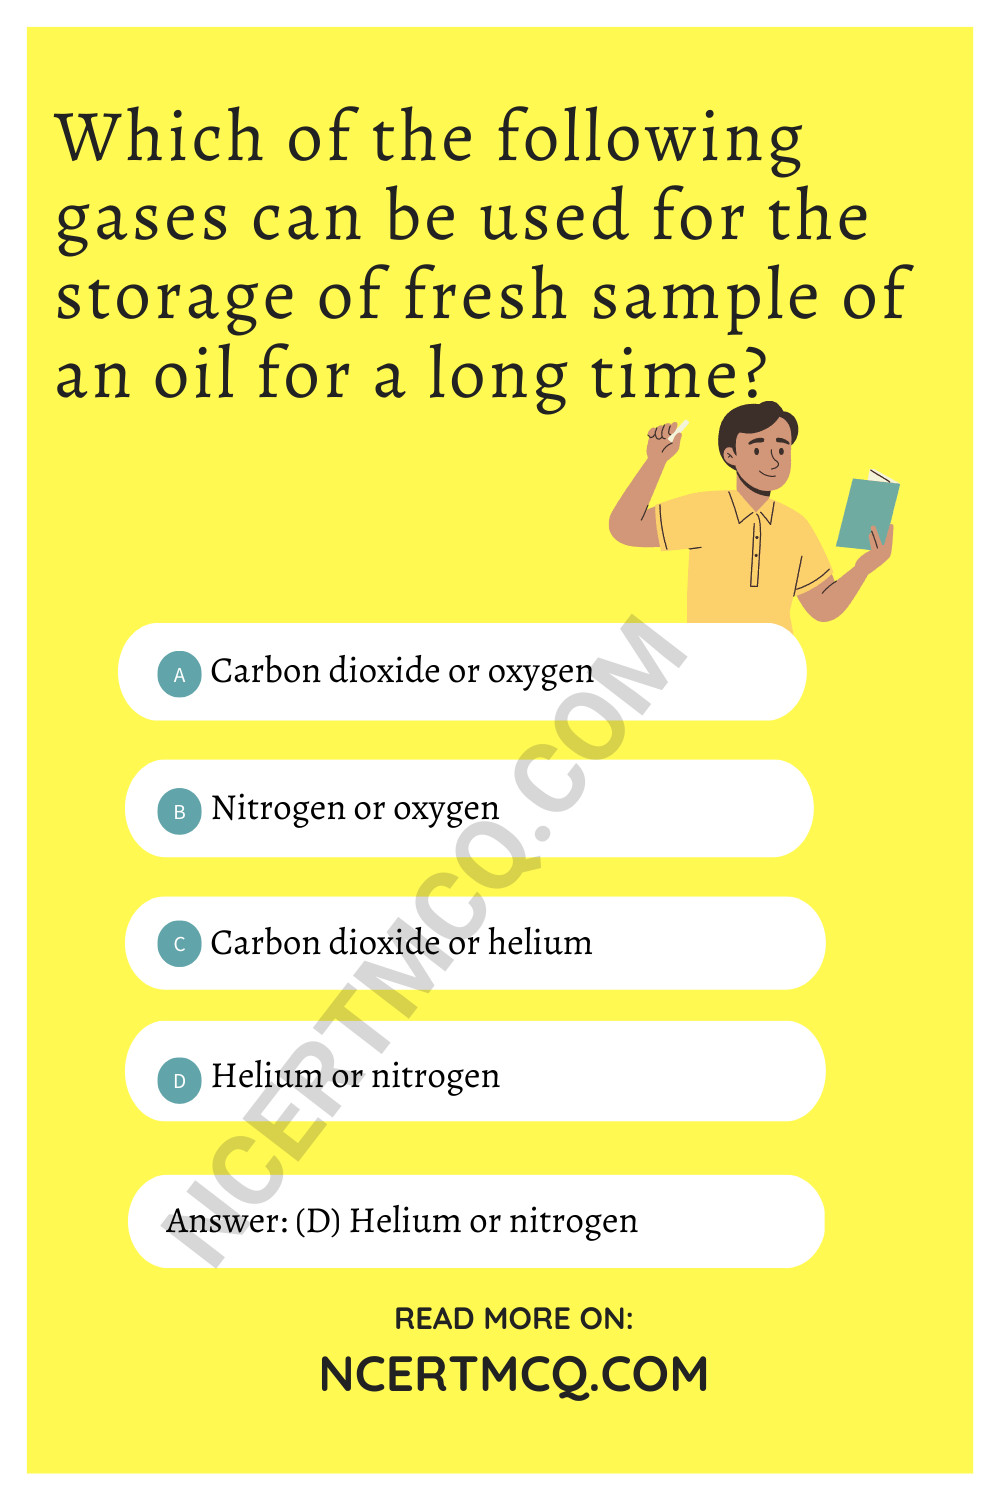 Which of the following gases can be used for the storage of fresh sample of an oil for a long time?